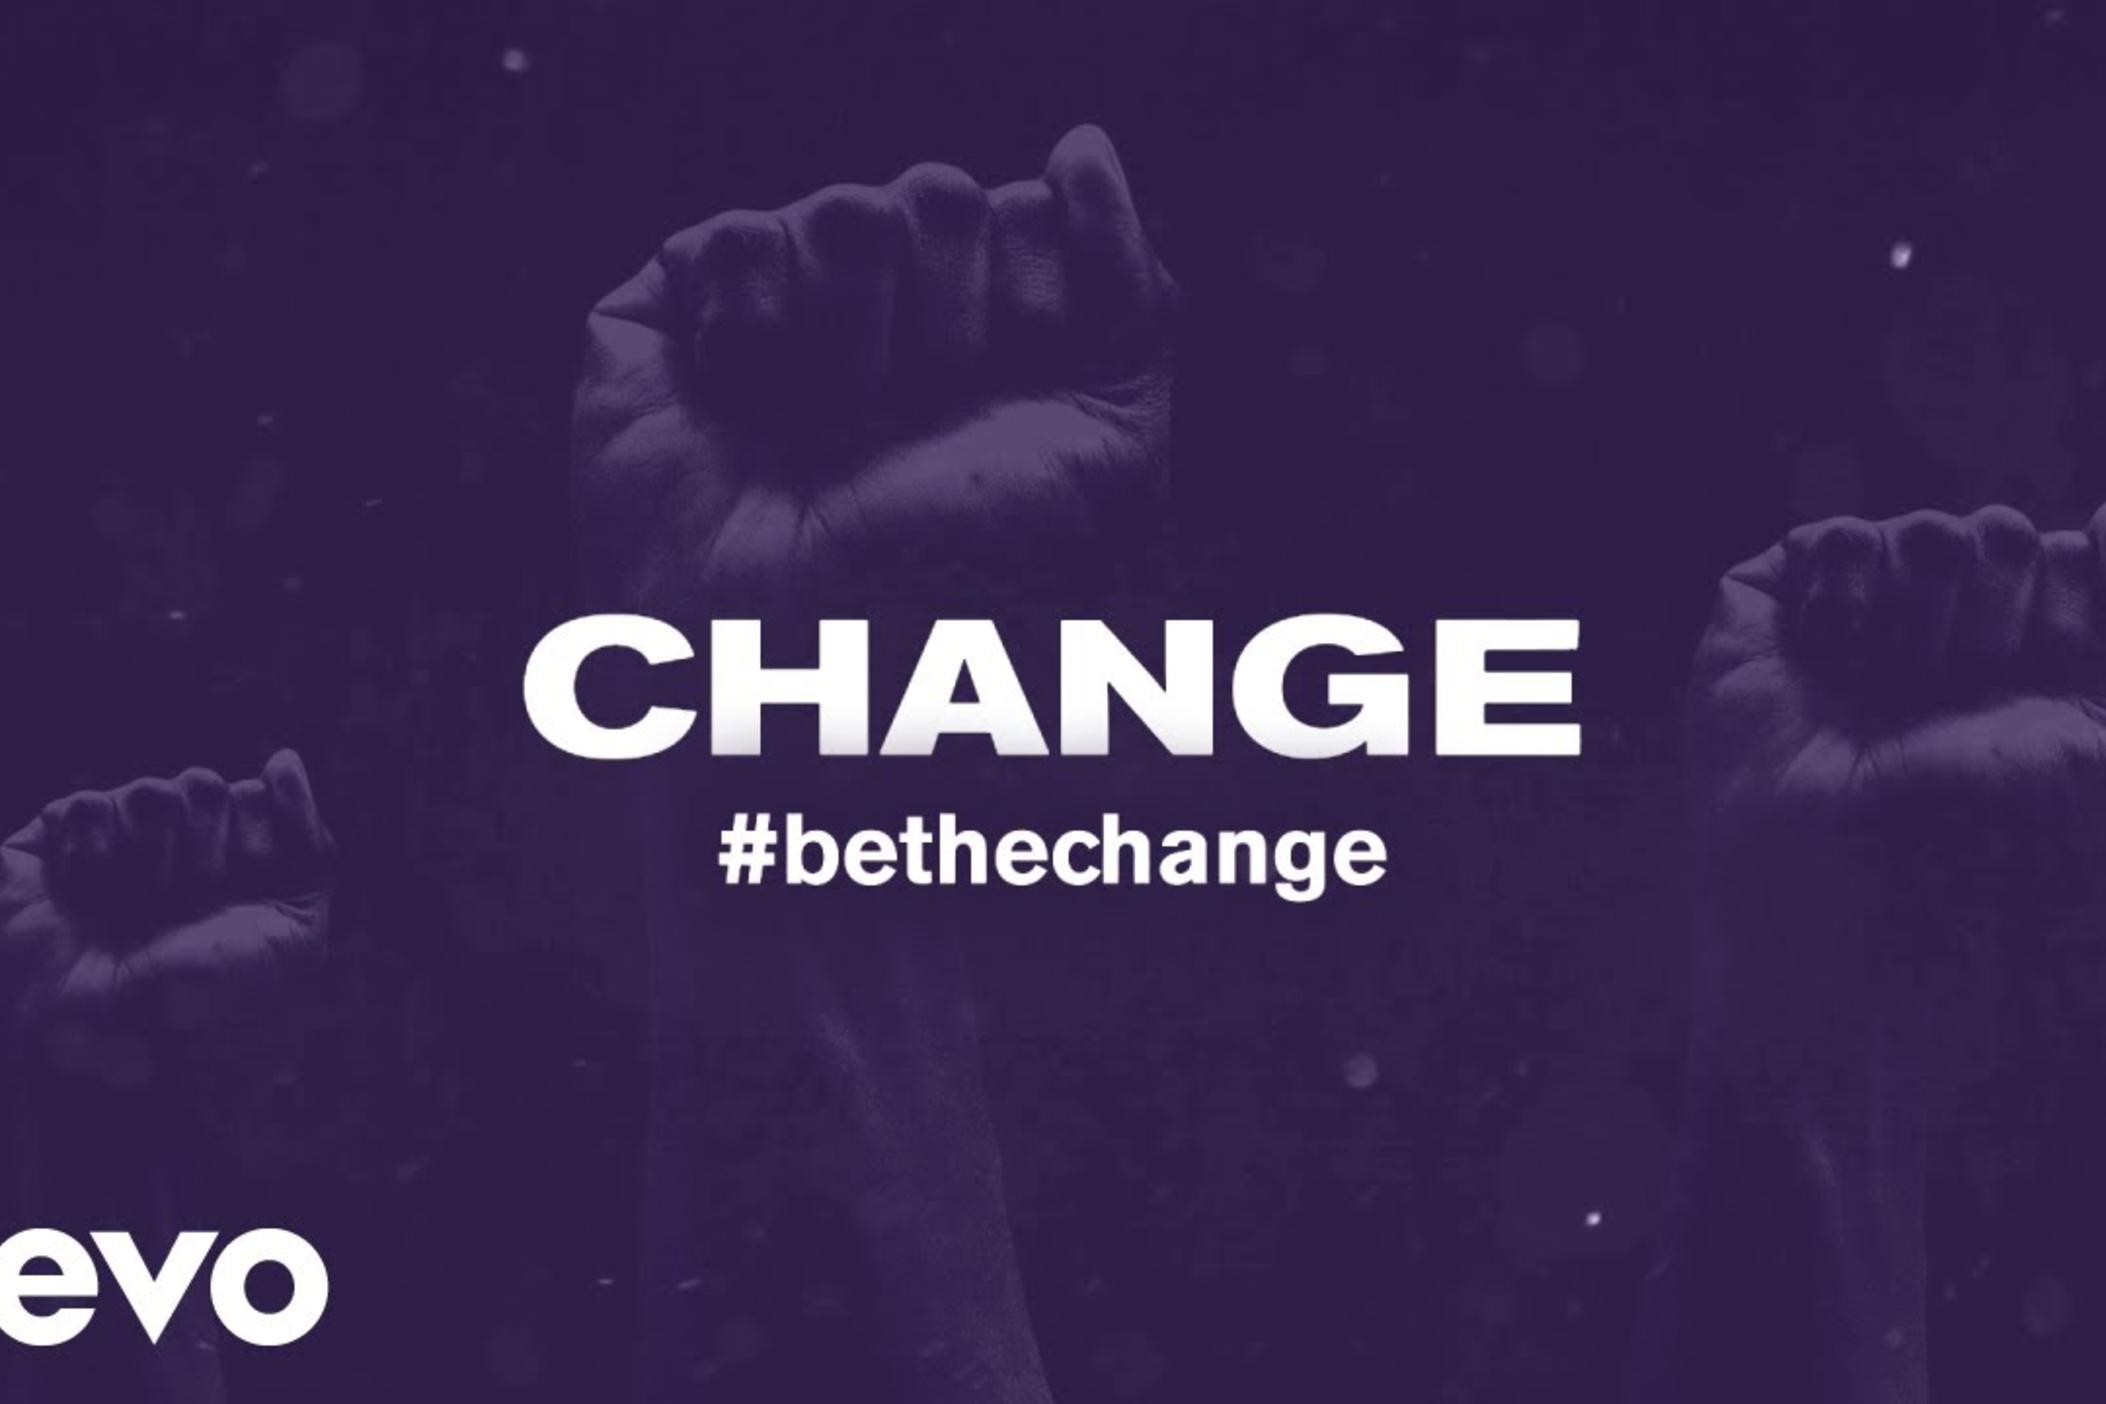 Thumbnail for Jermaine Dupri's "Change" music video with three fists and a purple overlay.